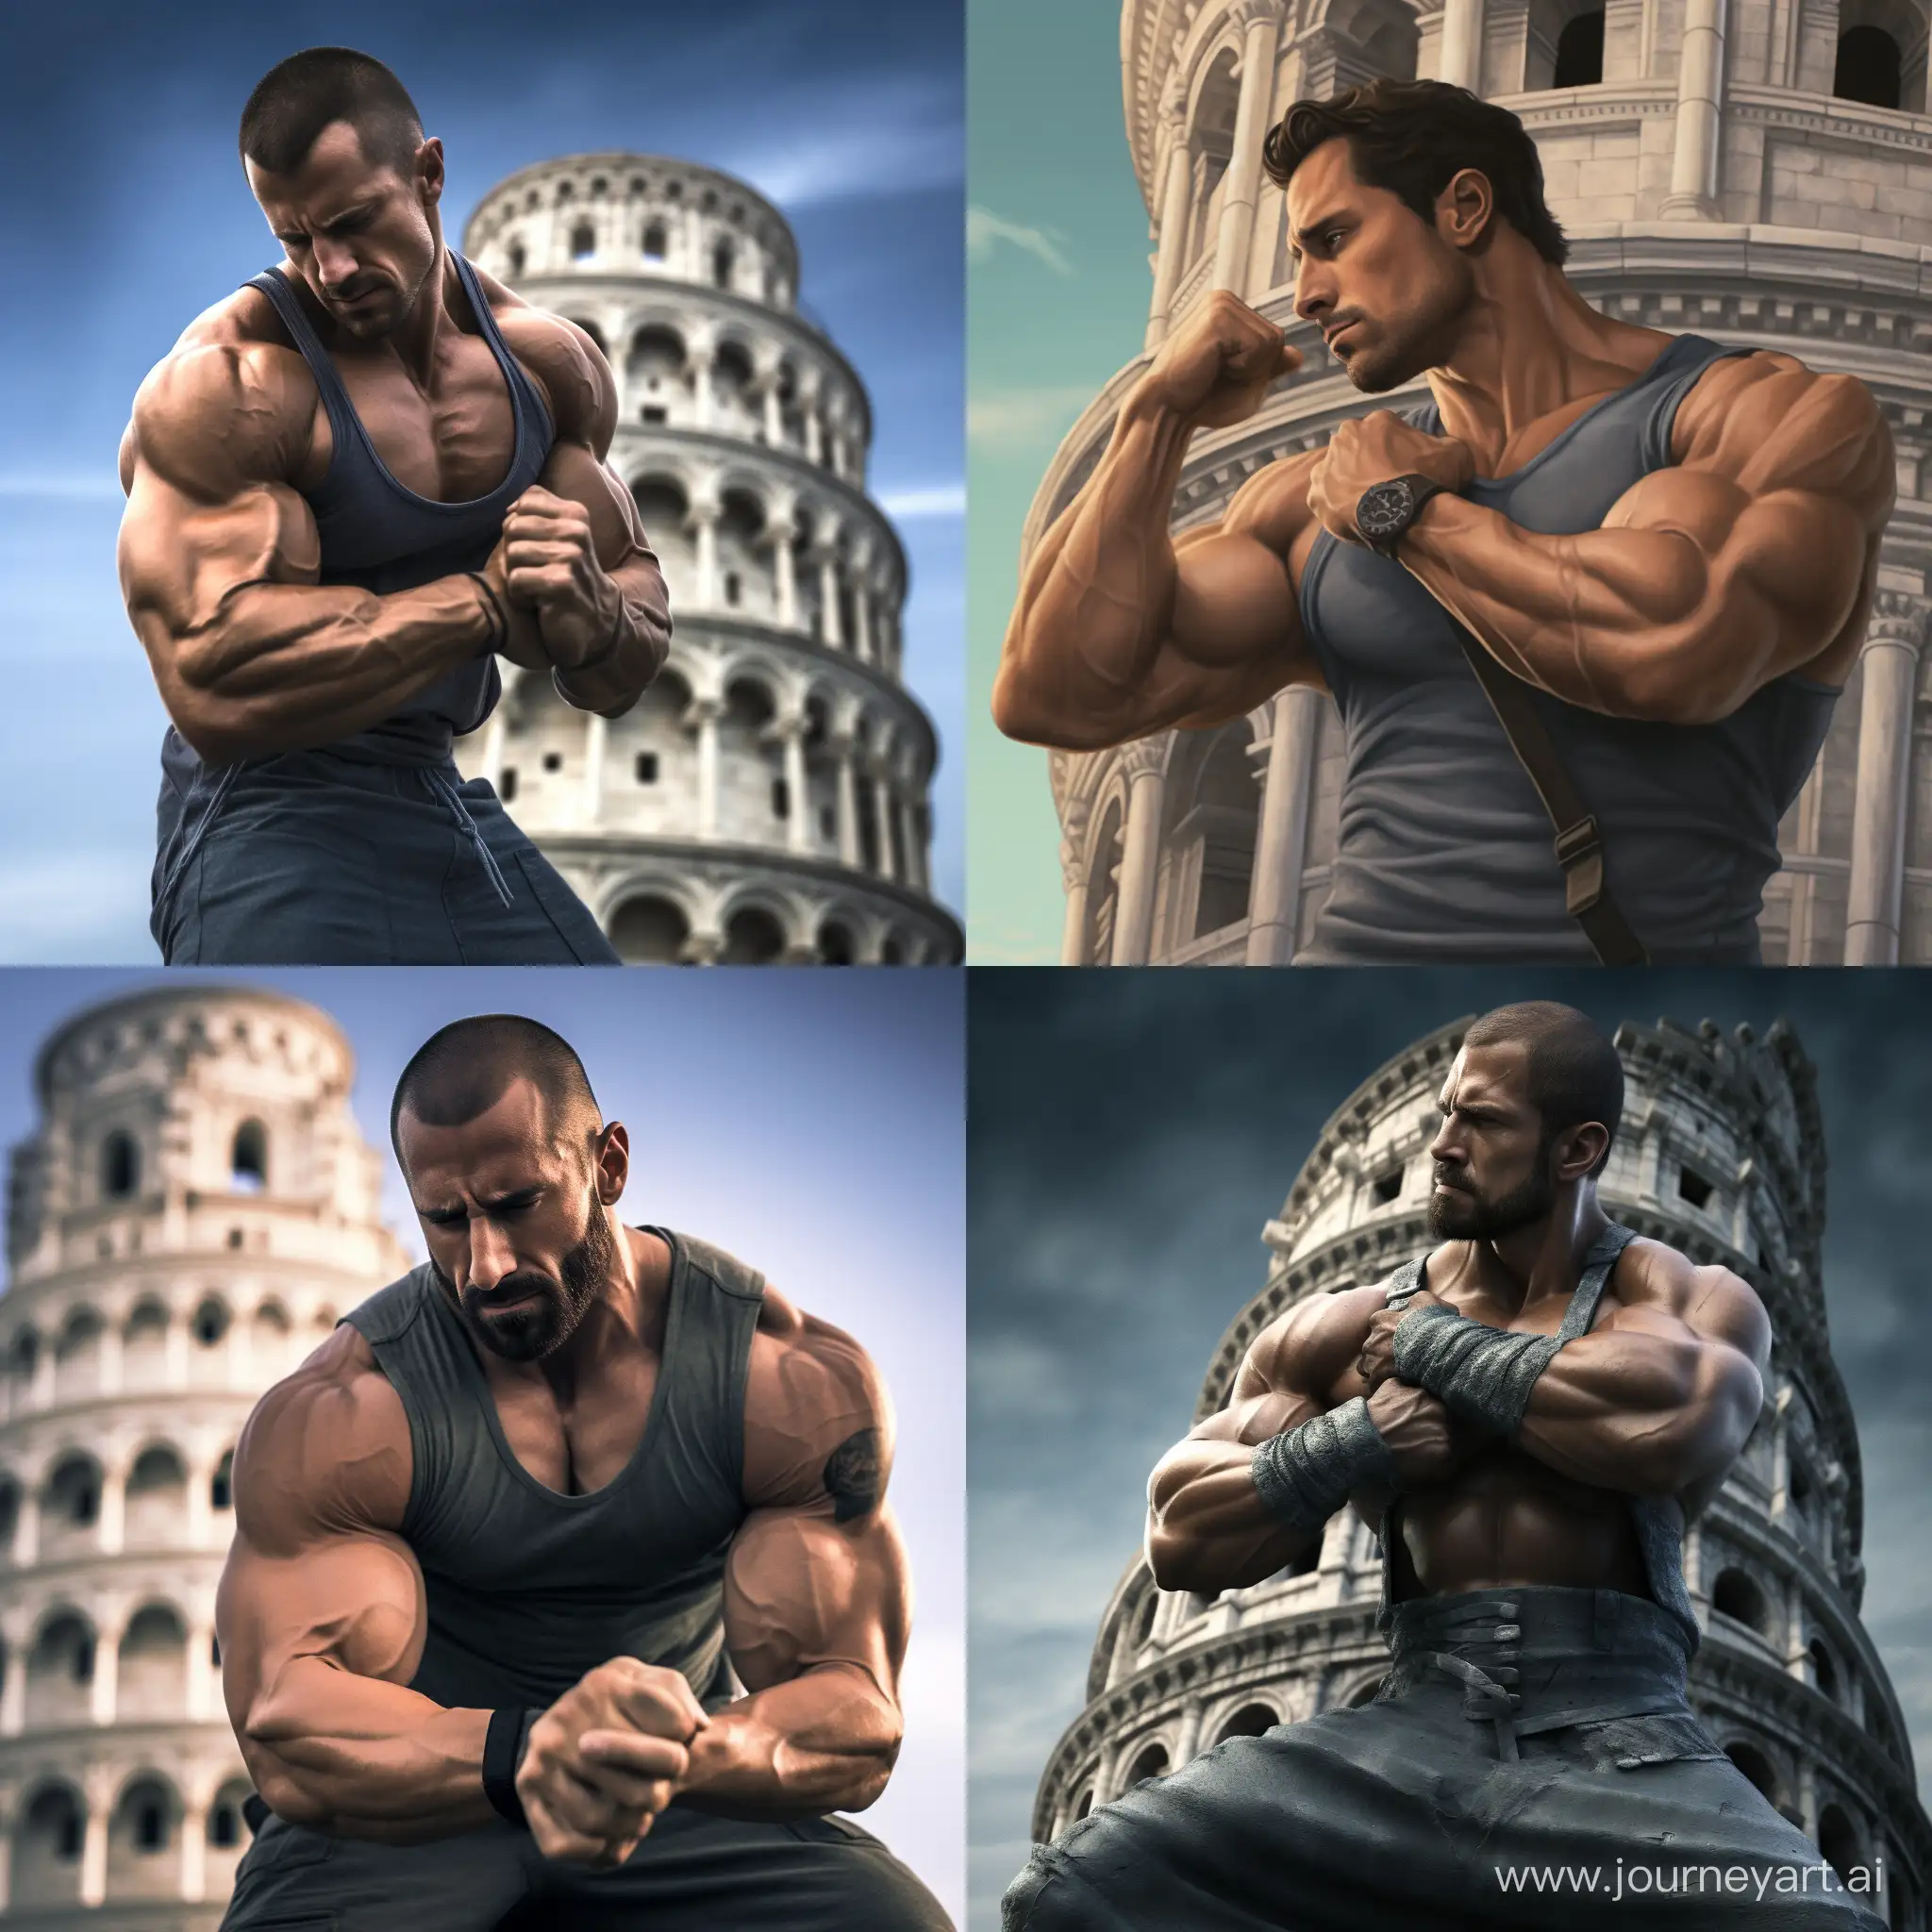 Muscular-Man-Preventing-Leaning-Tower-of-Pisa-Collapse